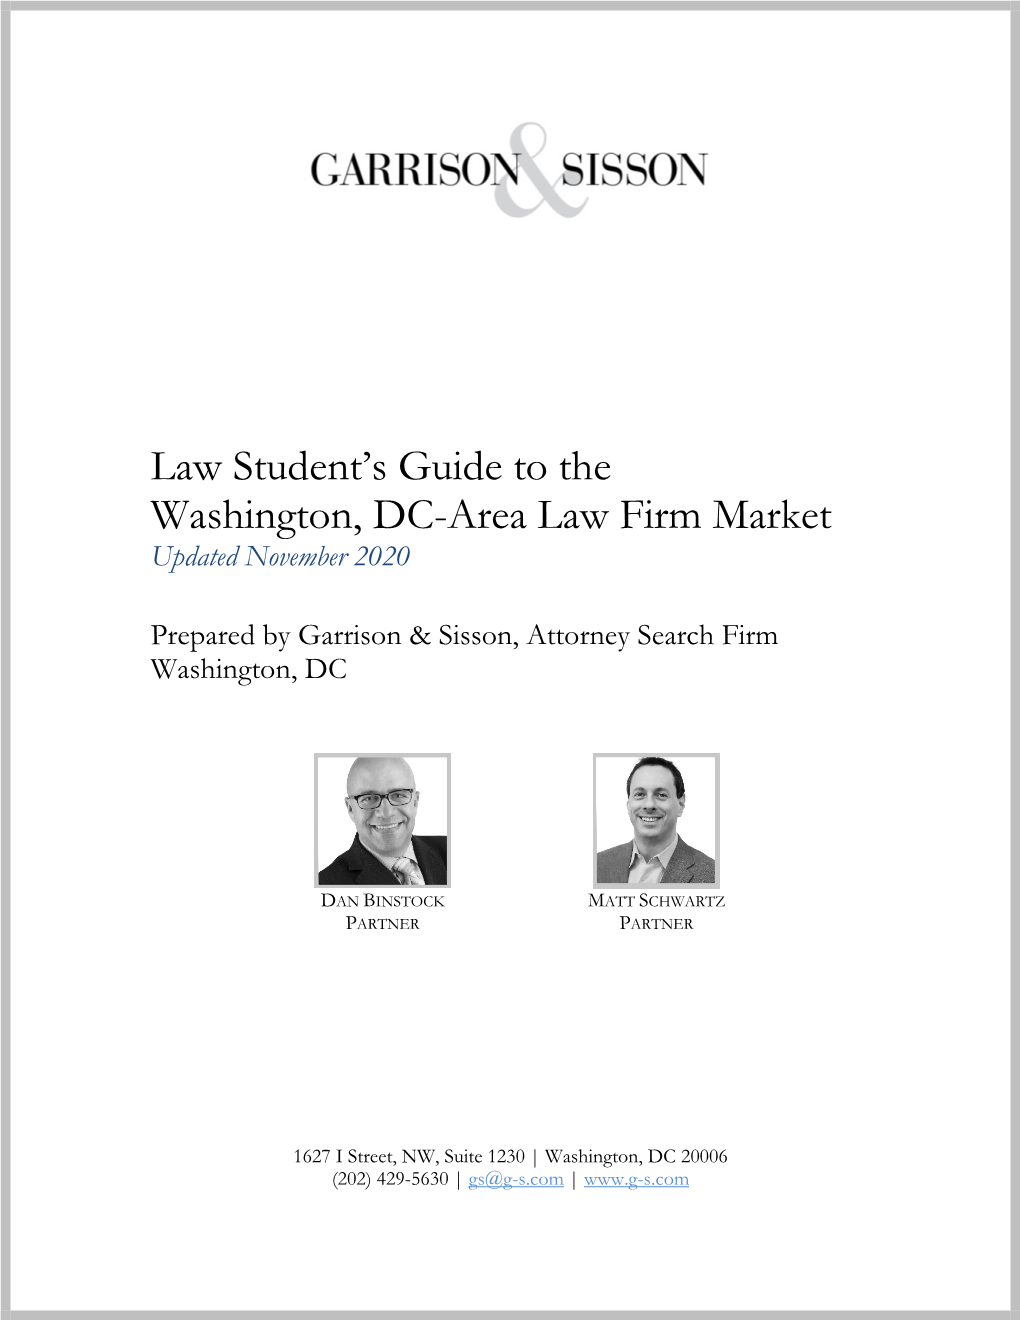 Practice Area & Market Guide to Washington Law Firms